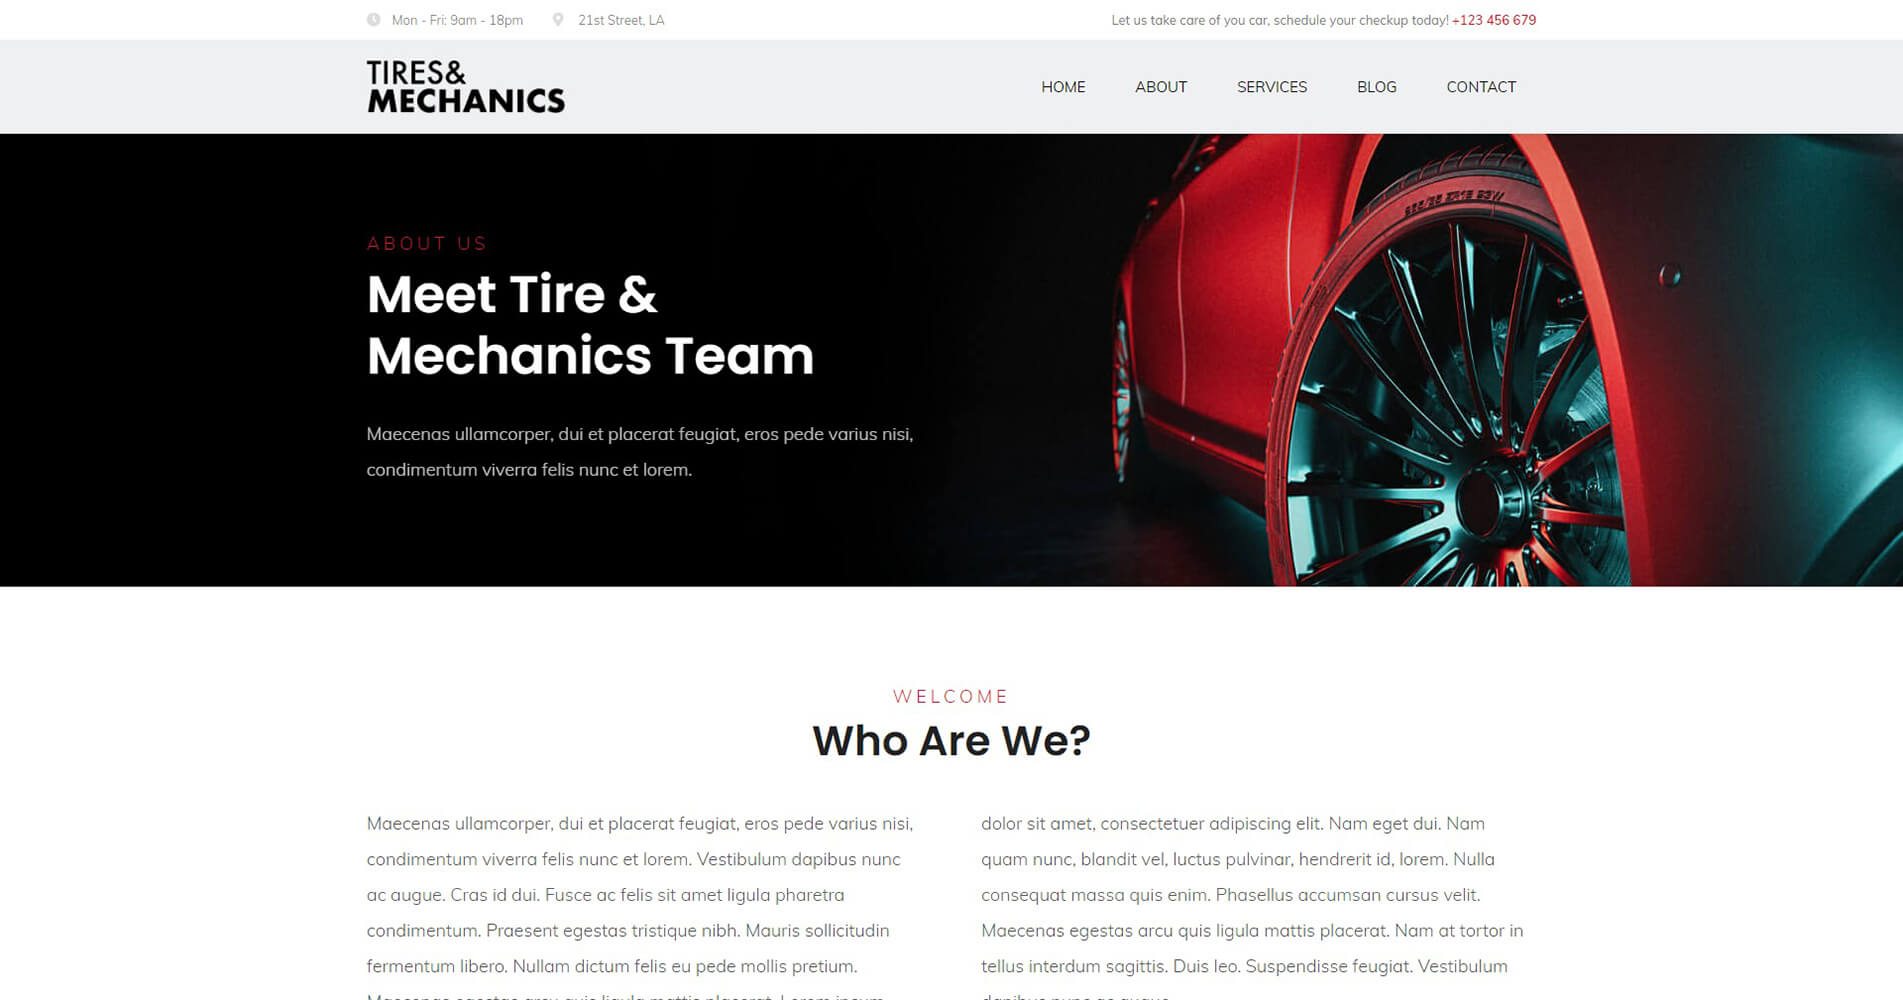 Tires & Mechanics About Page